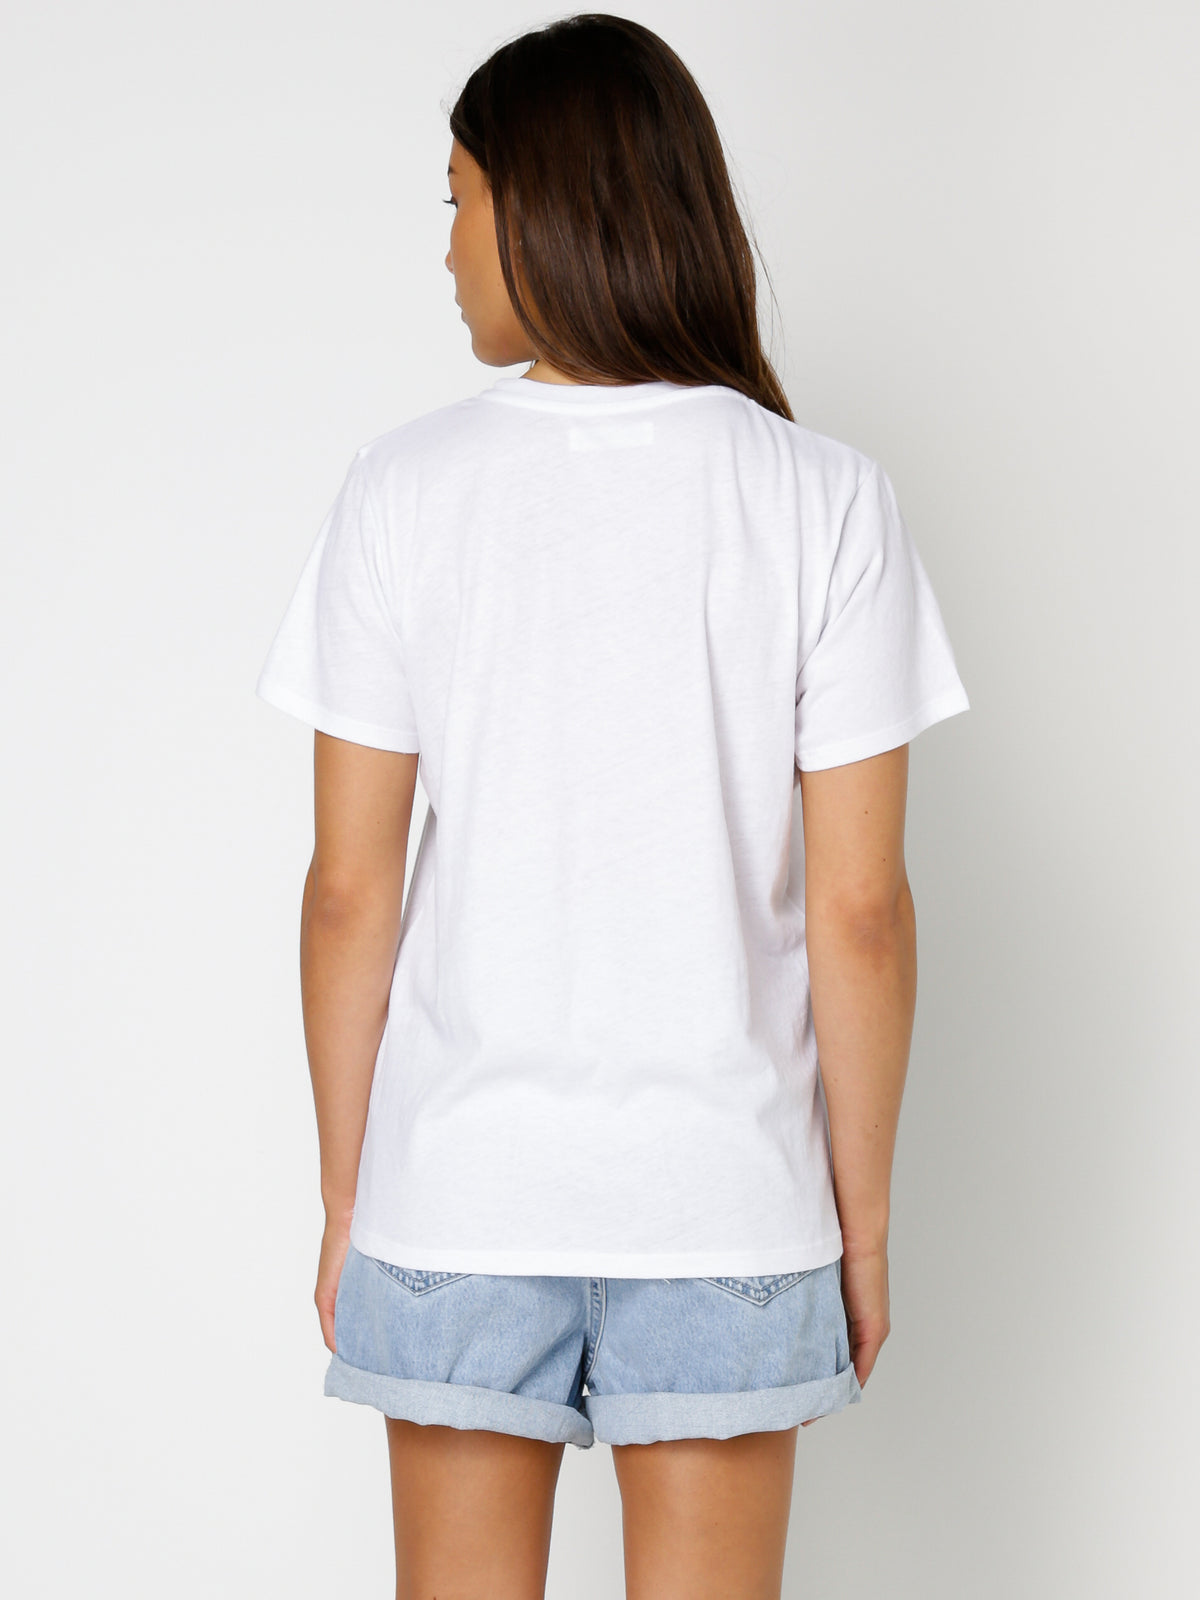 Miles T-Shirt in White